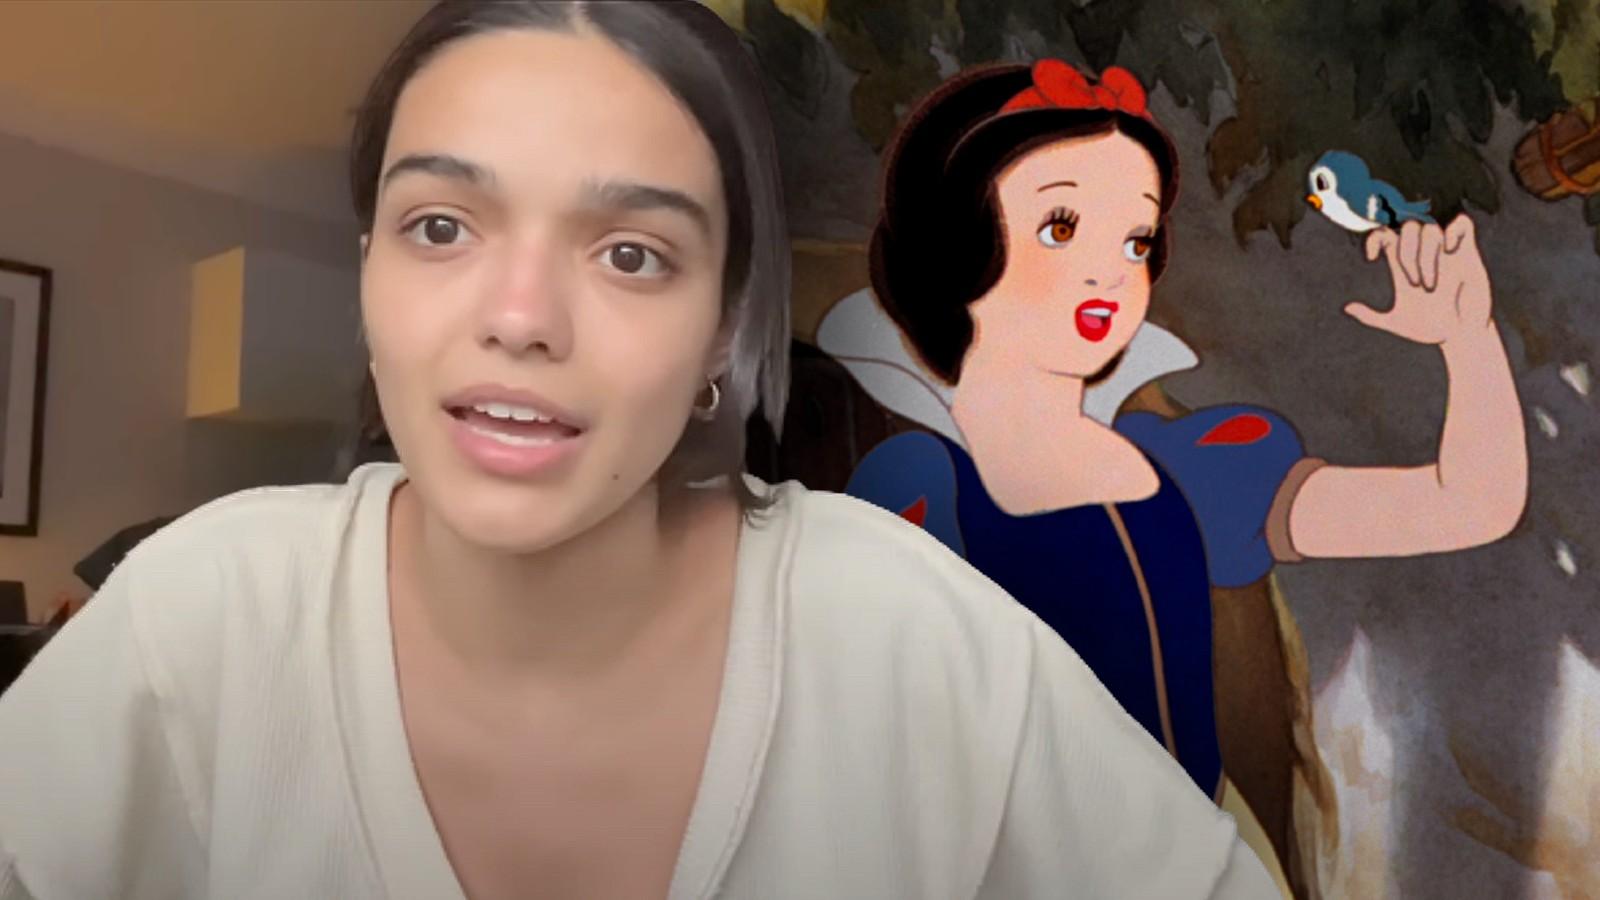 Upcoming South Park episode mocks Disney and Snow White actor Rachel Zegler  in the most brutal of ways